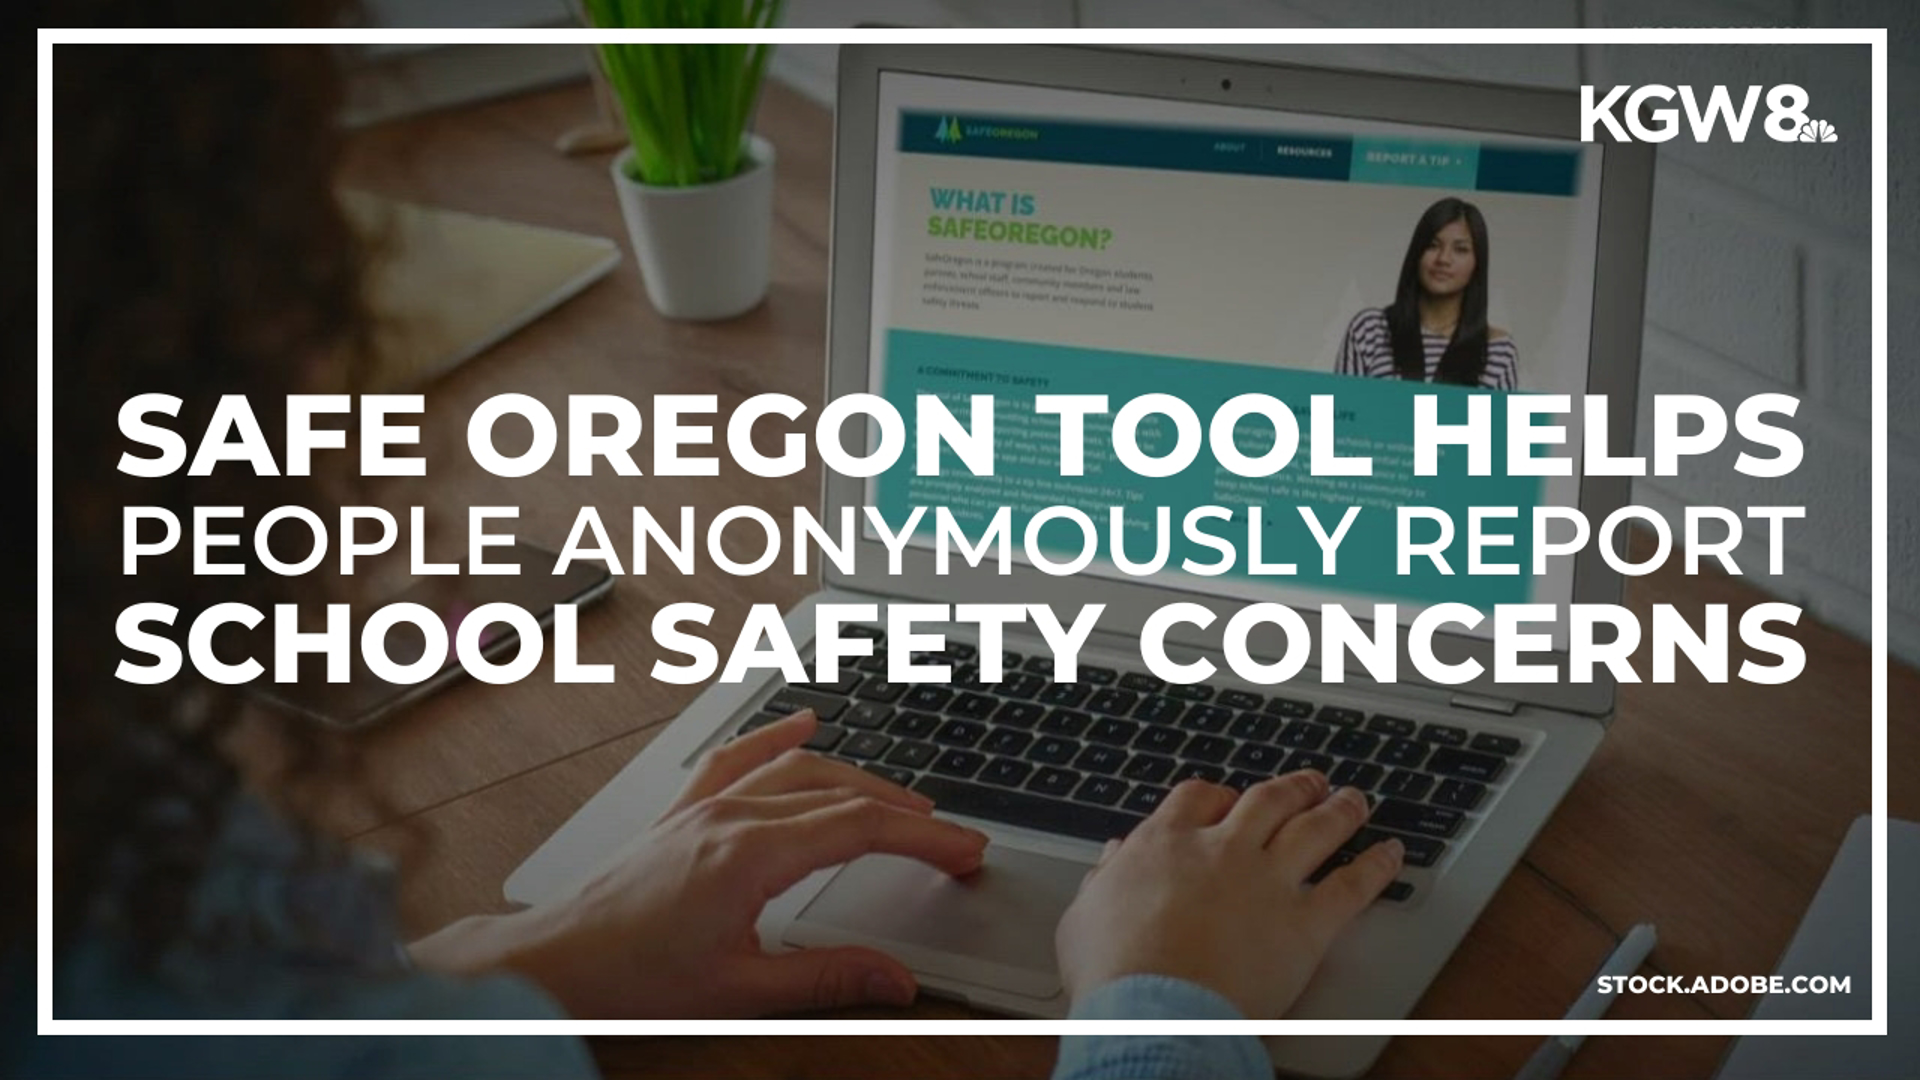 How Can Students Learn to Identify And Report Tool Hazards?